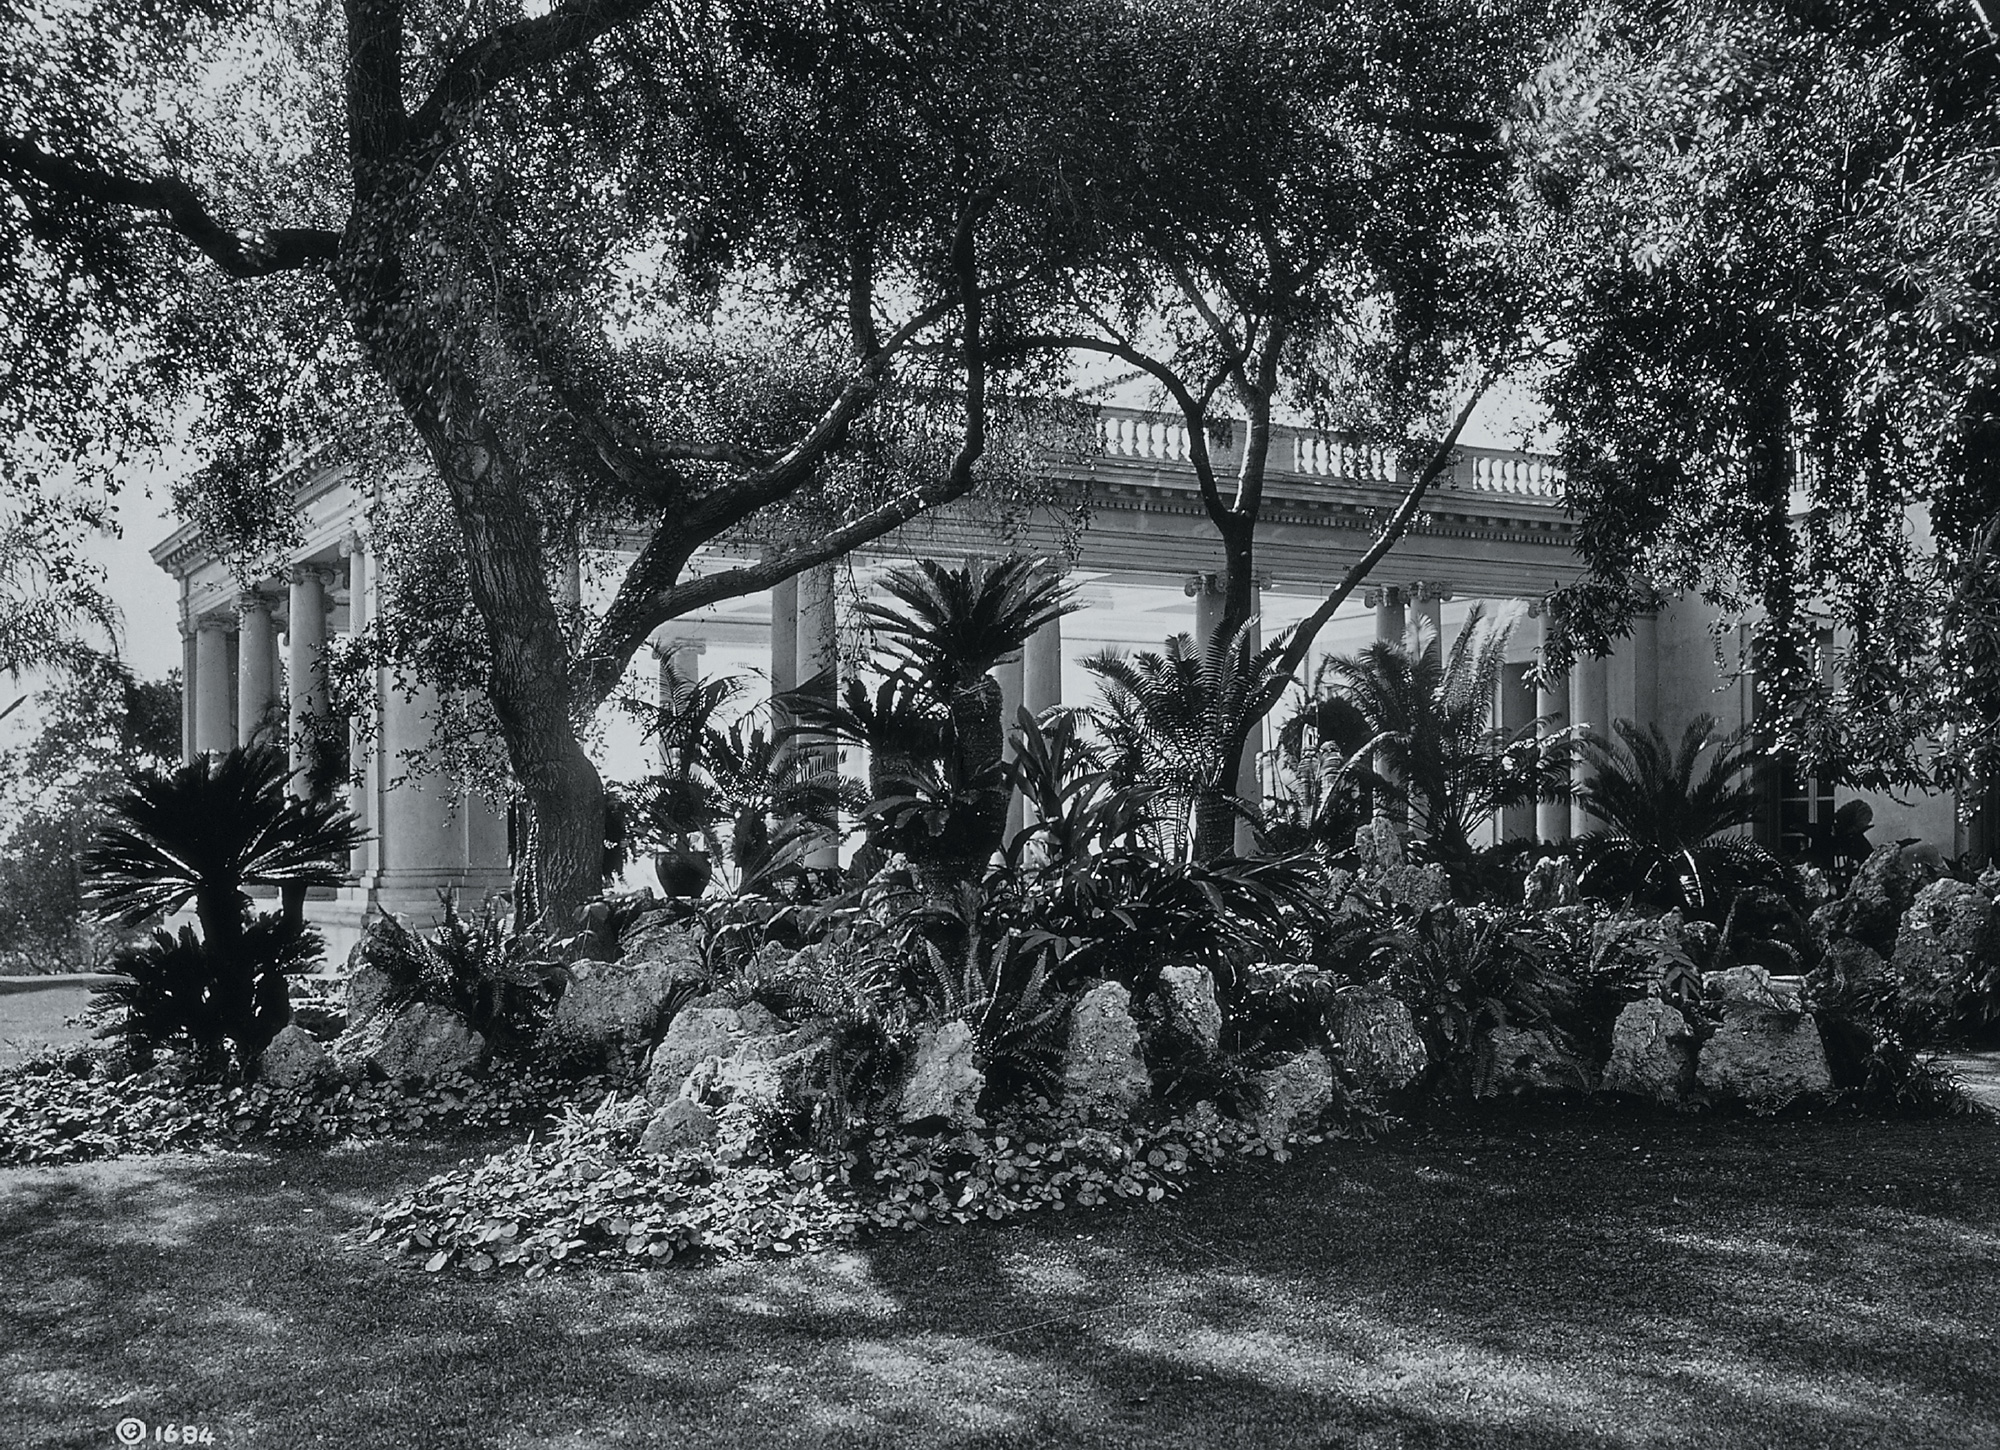 An undated photograph of rockery with cycads at Huntington Gardens in San Marino, California.